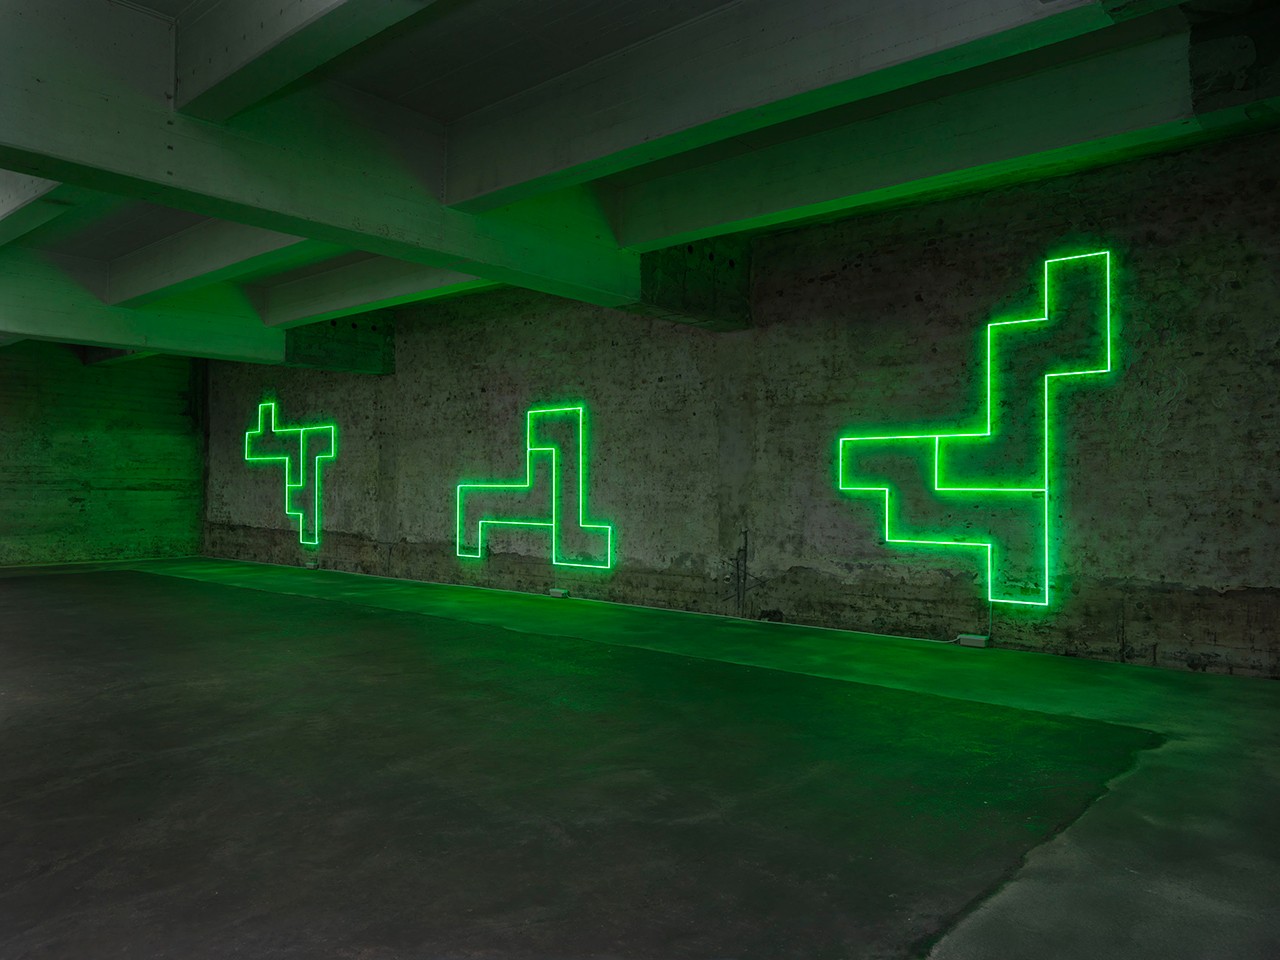 Title of Installation: In Green, in Line, in Pairs: Eleven Double Structures – Unfolding the Cube Material: Neon tubes green (12mm diameter) Dimensions: Dimensions variable in relation to space Exhibition: In situ: A Sequence of Works Berlin Tegel June 1 – 30, 2016